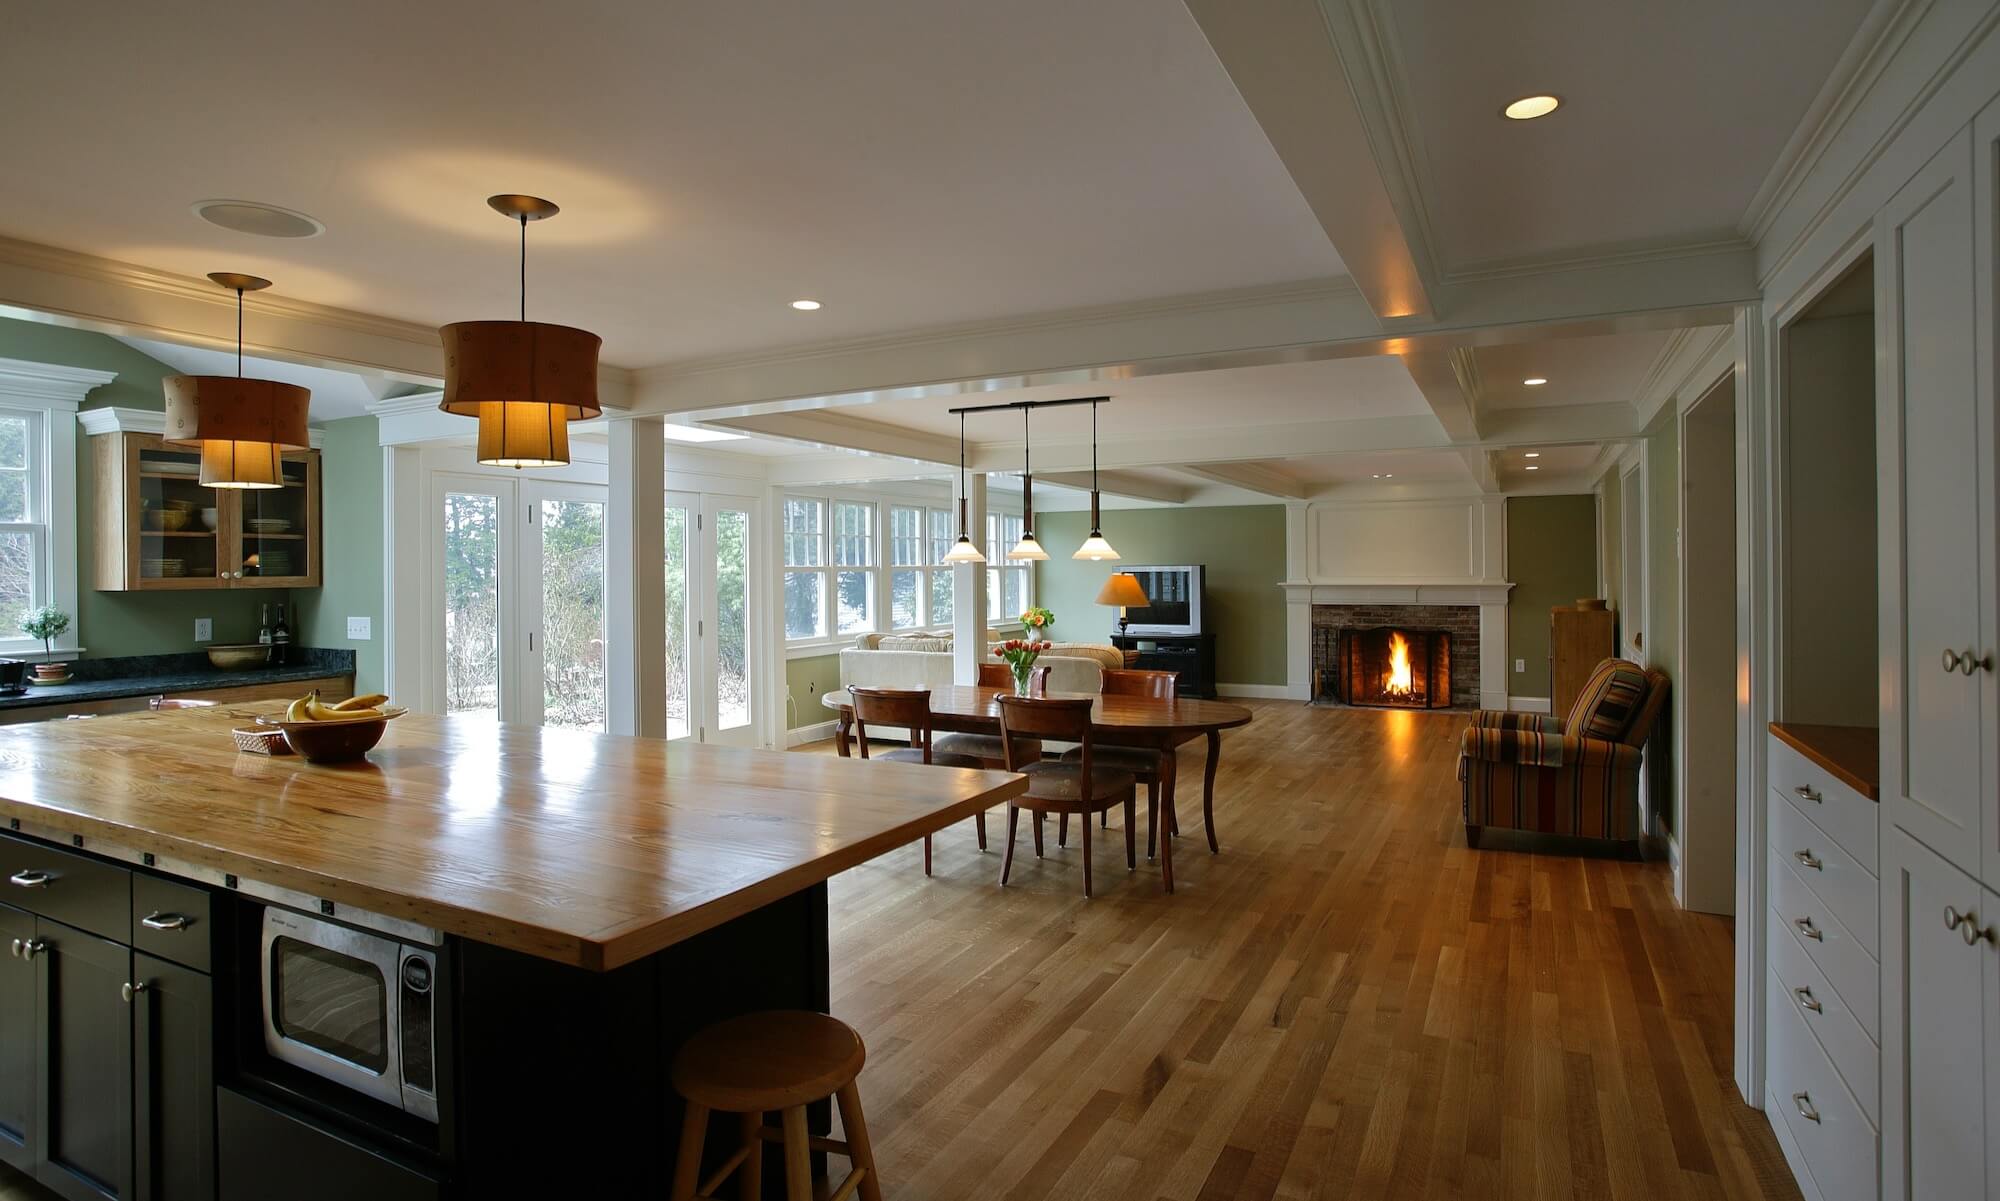 Kitchen and living room addition with box beam ceiling in Scituate MA. Featured in Fine Homebuilding Magazine.